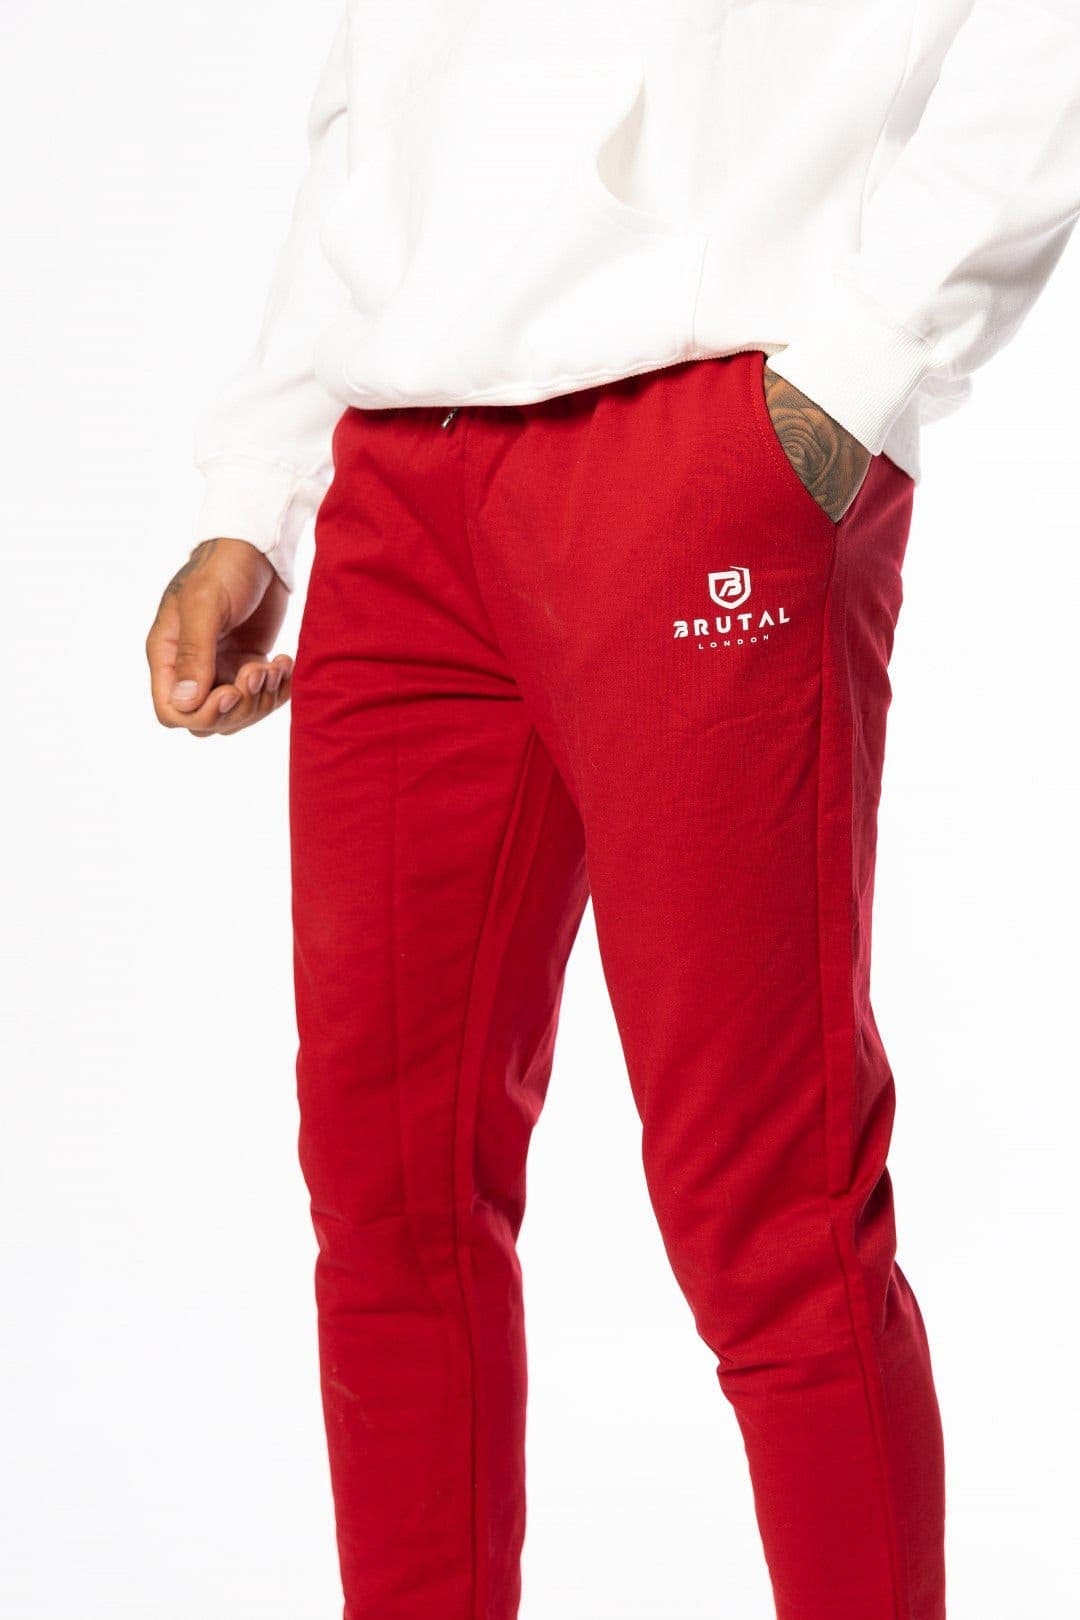 Red Casual Joggers - Brutal London Clothing